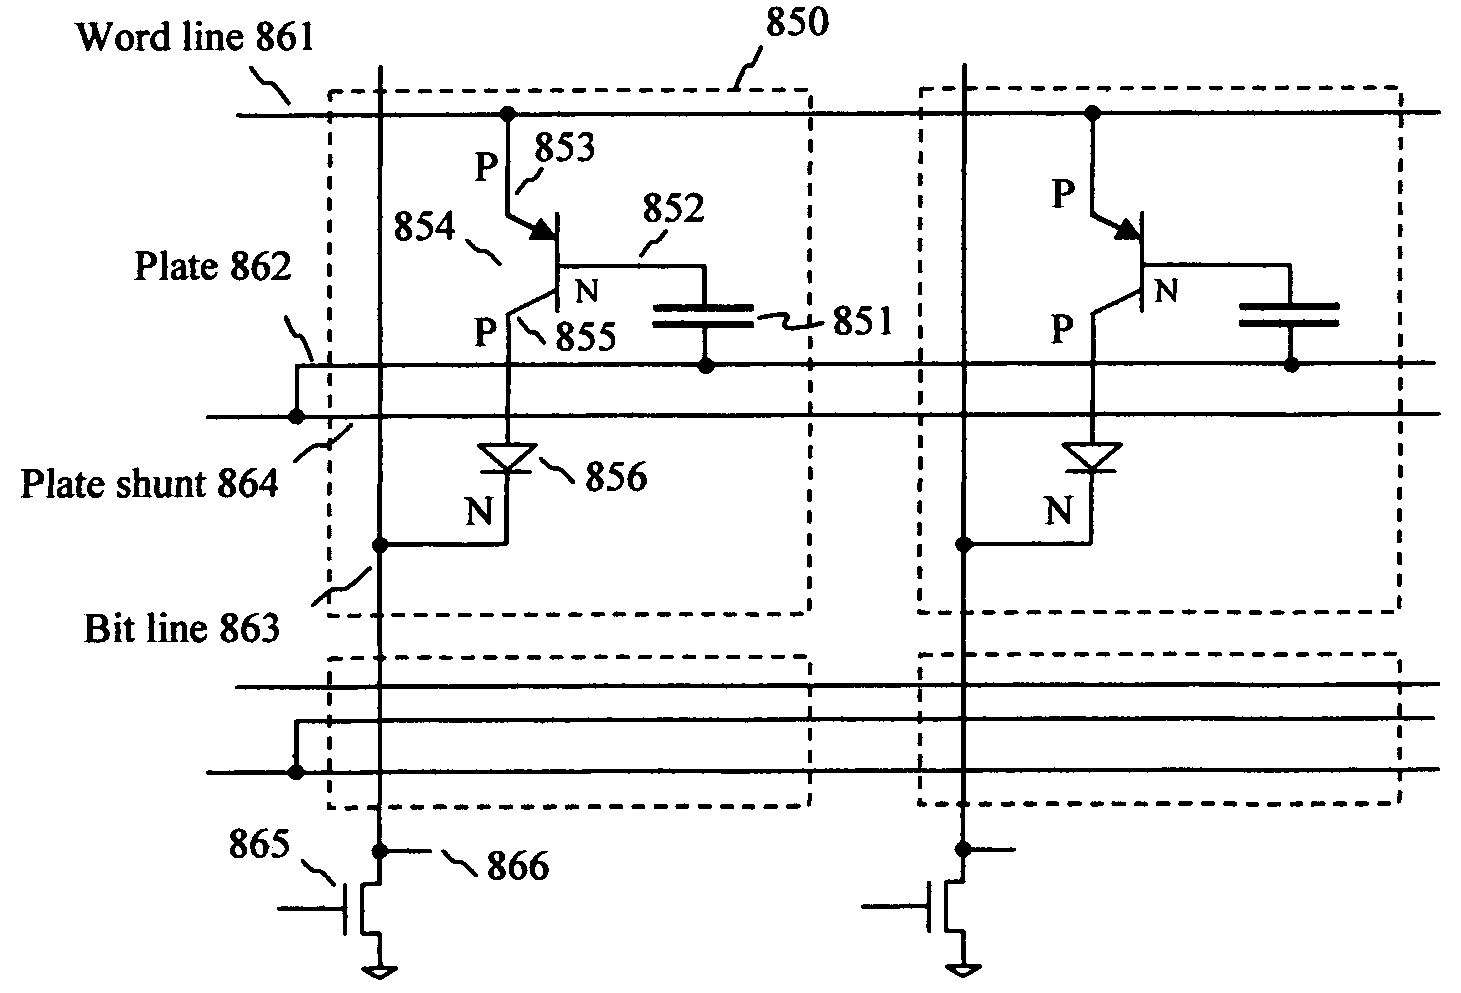 Planar capacitor memory cell and its applications